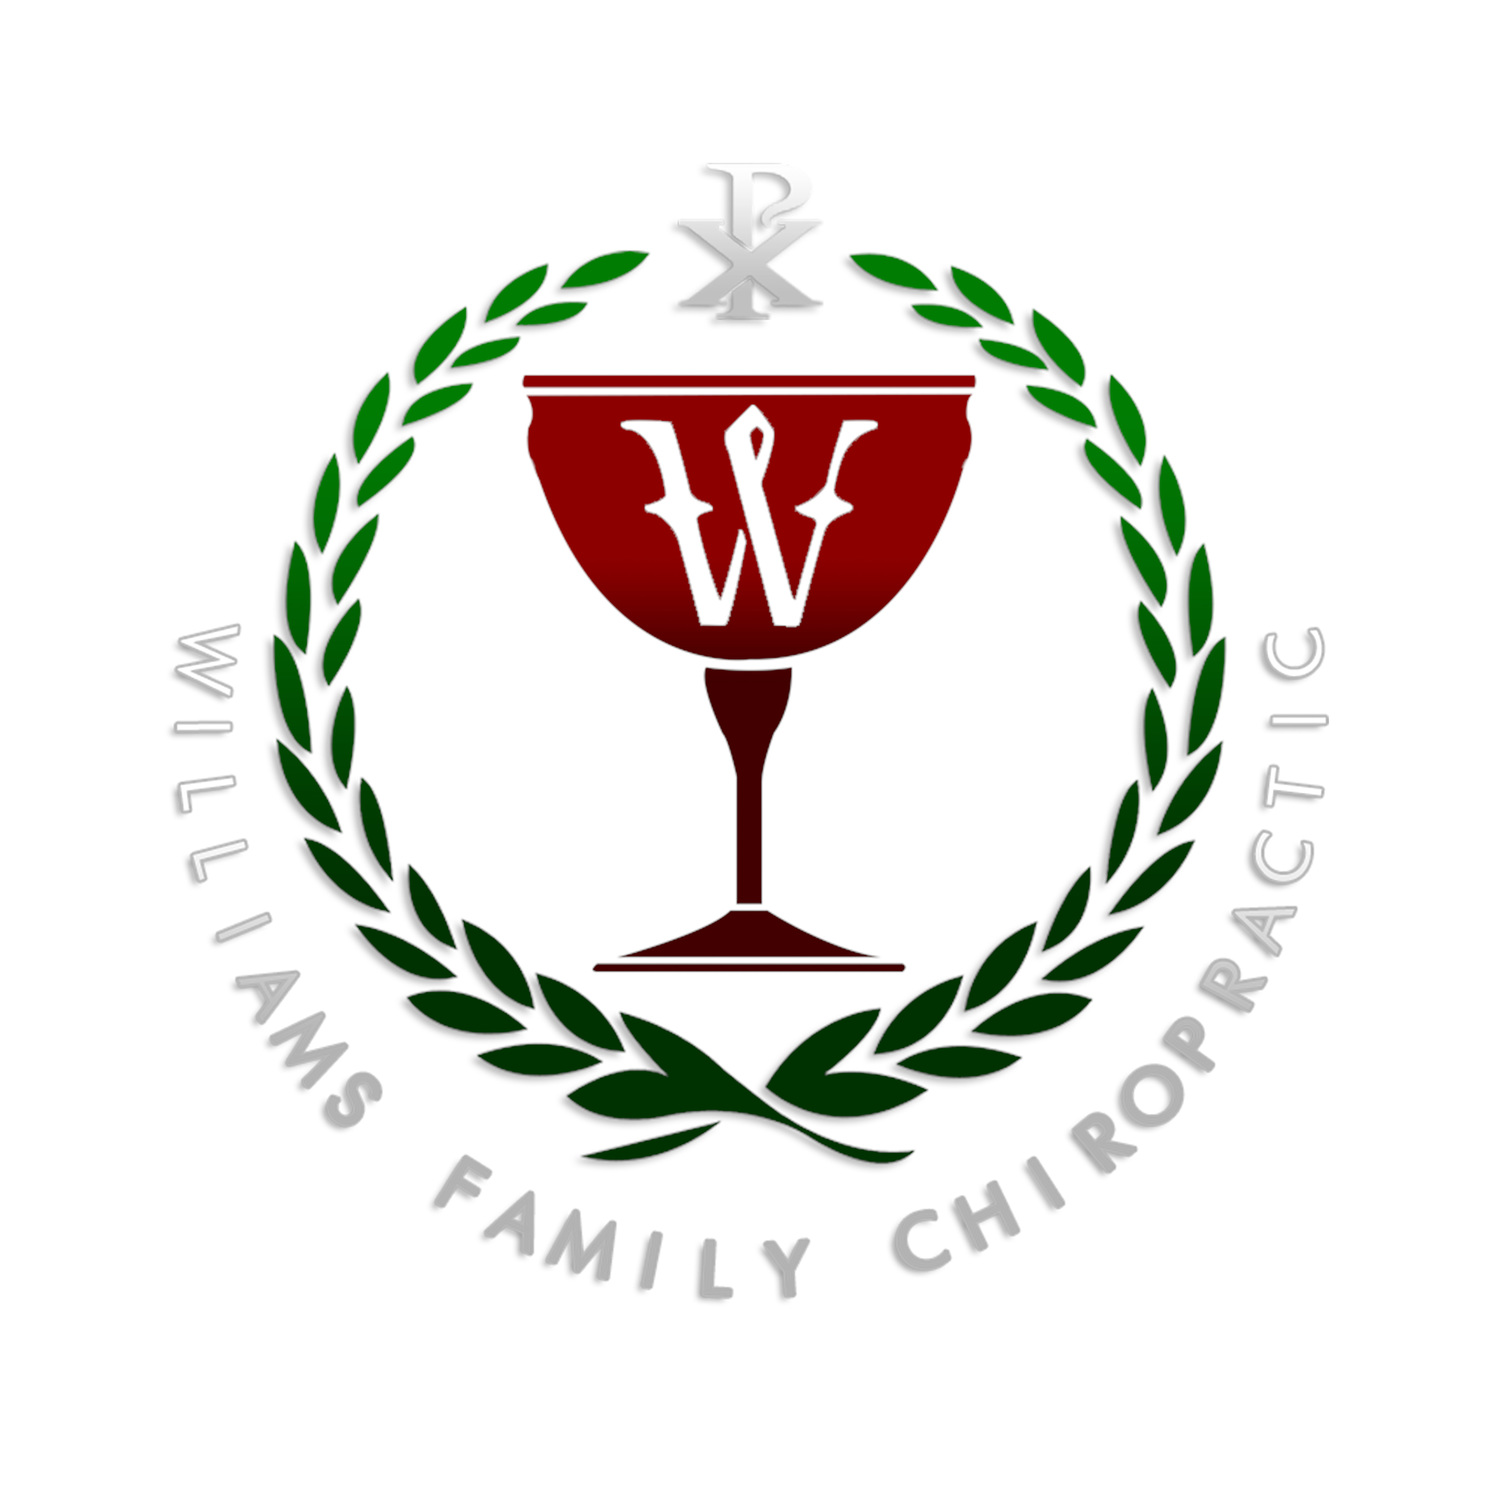 Williams Family Chiropractor